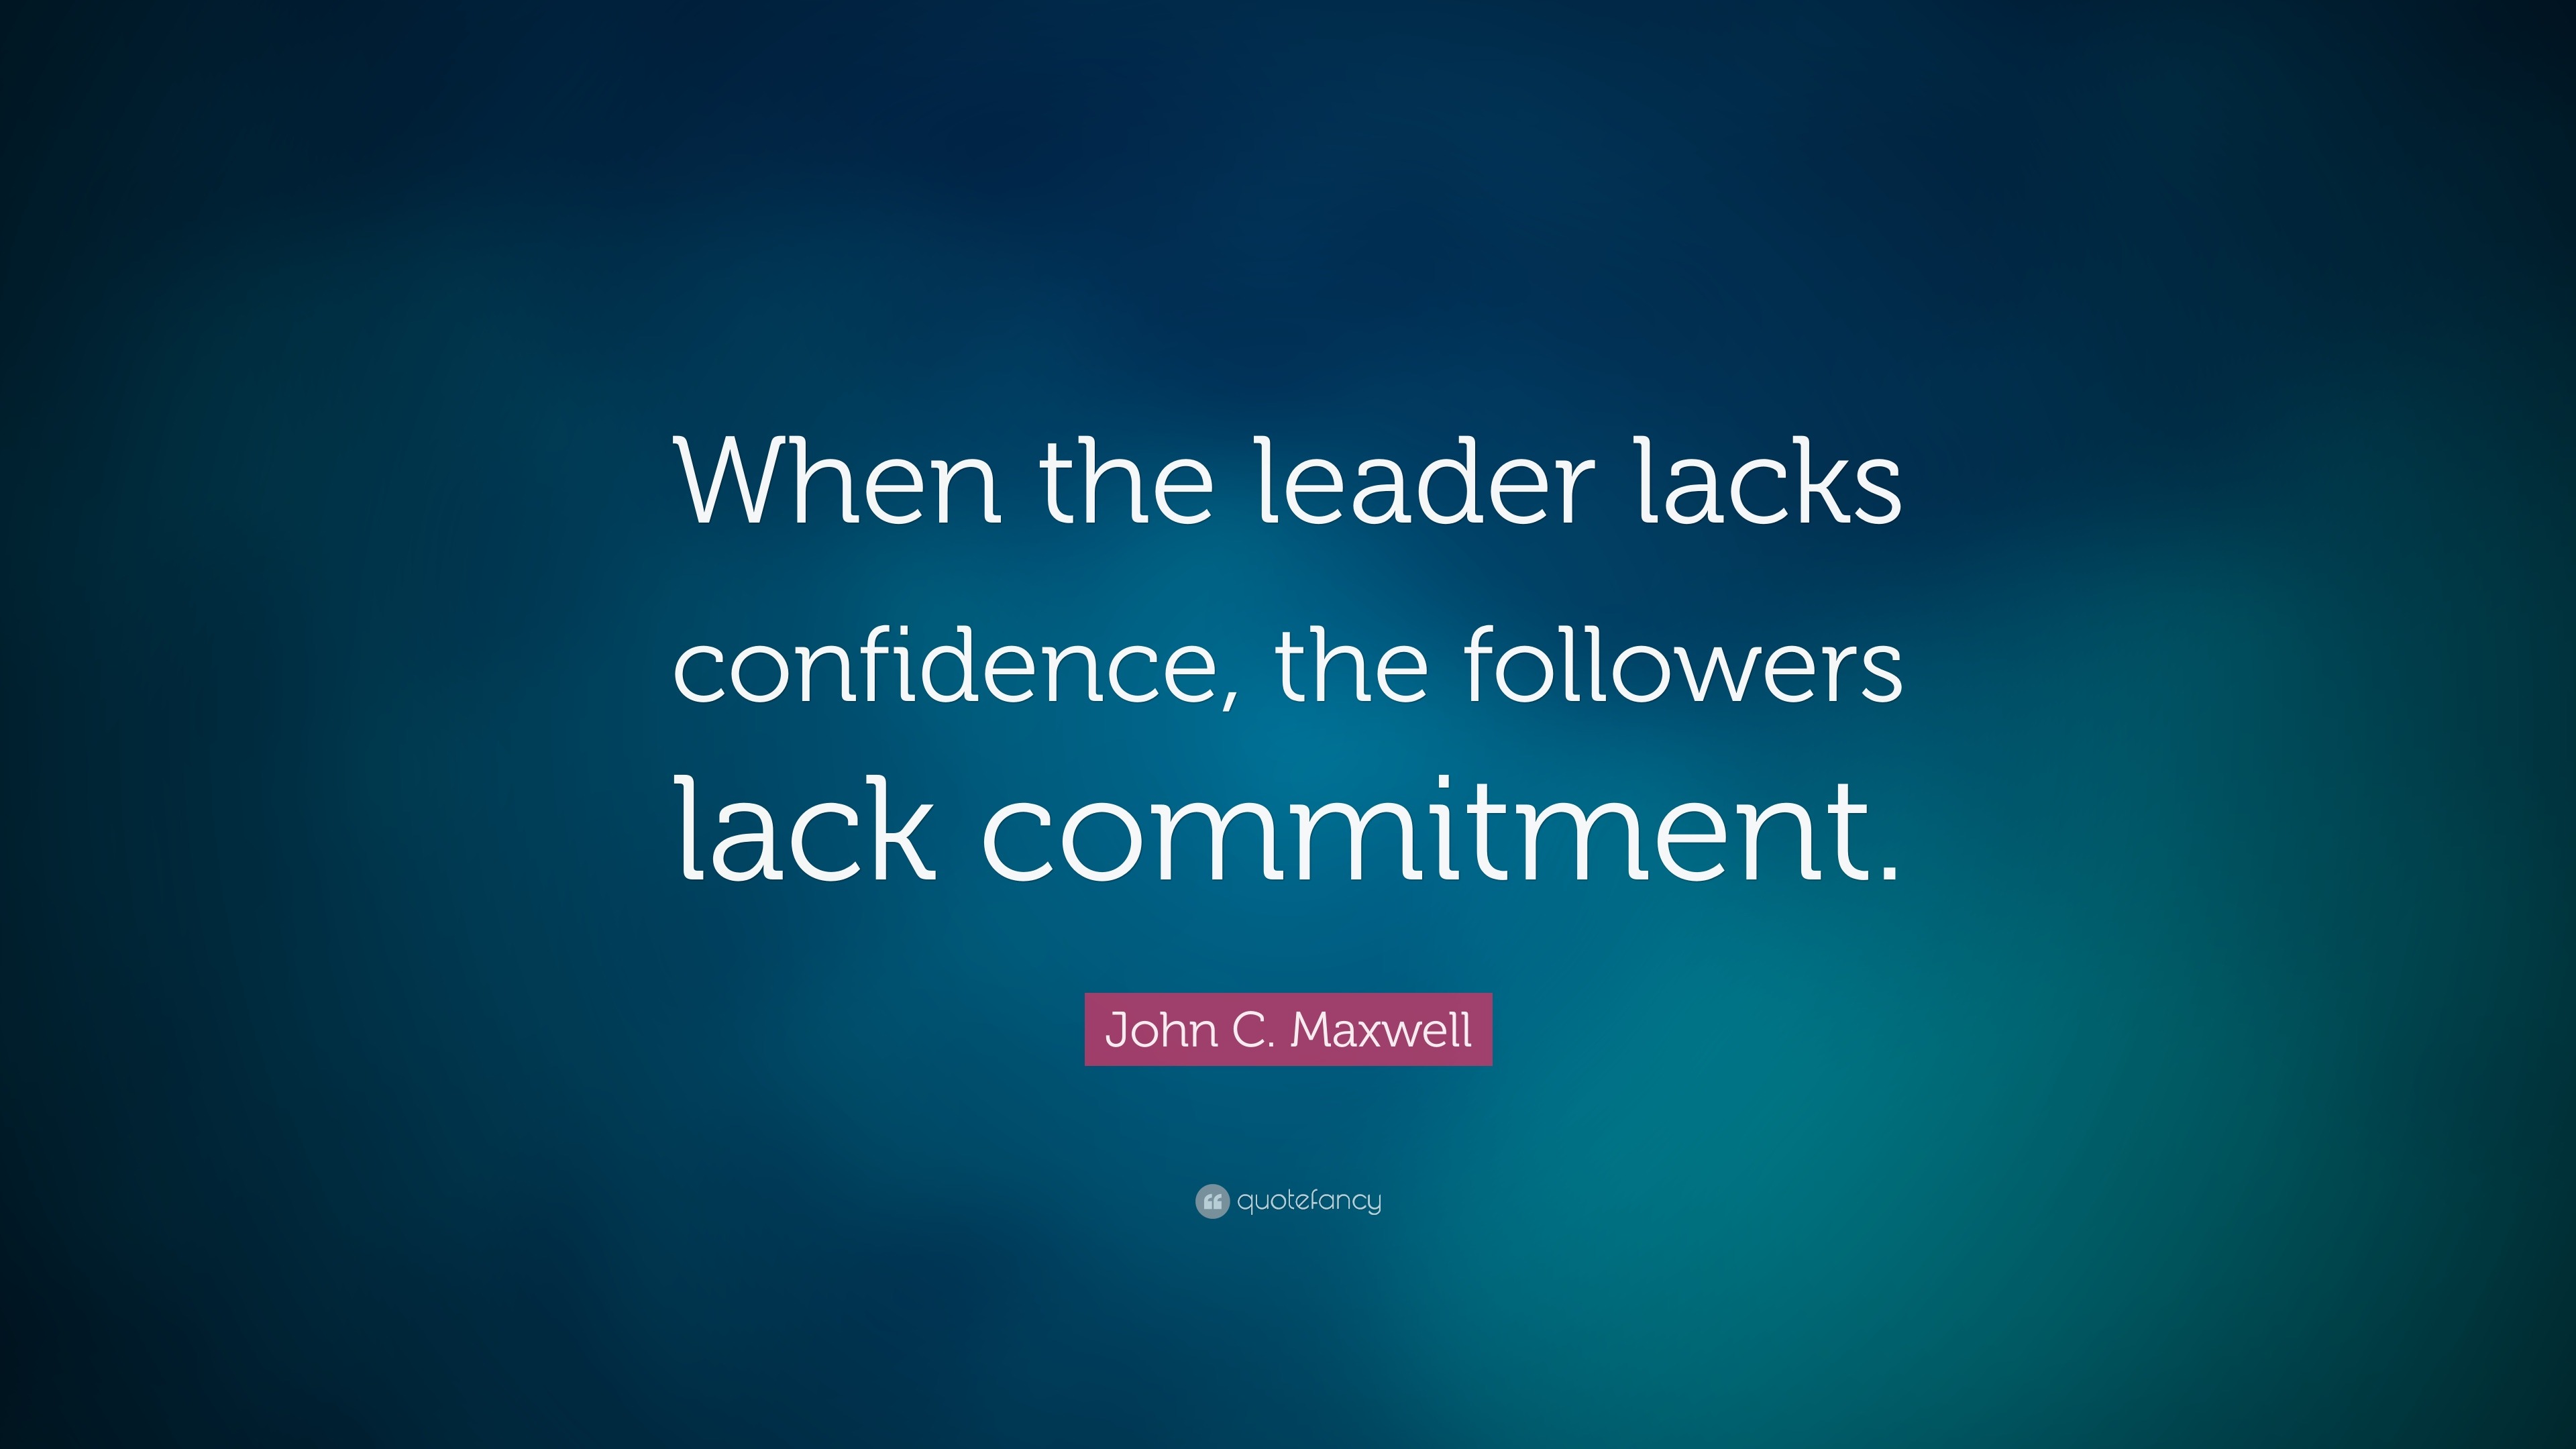 John C. Maxwell Quote: “When the leader lacks confidence, the followers